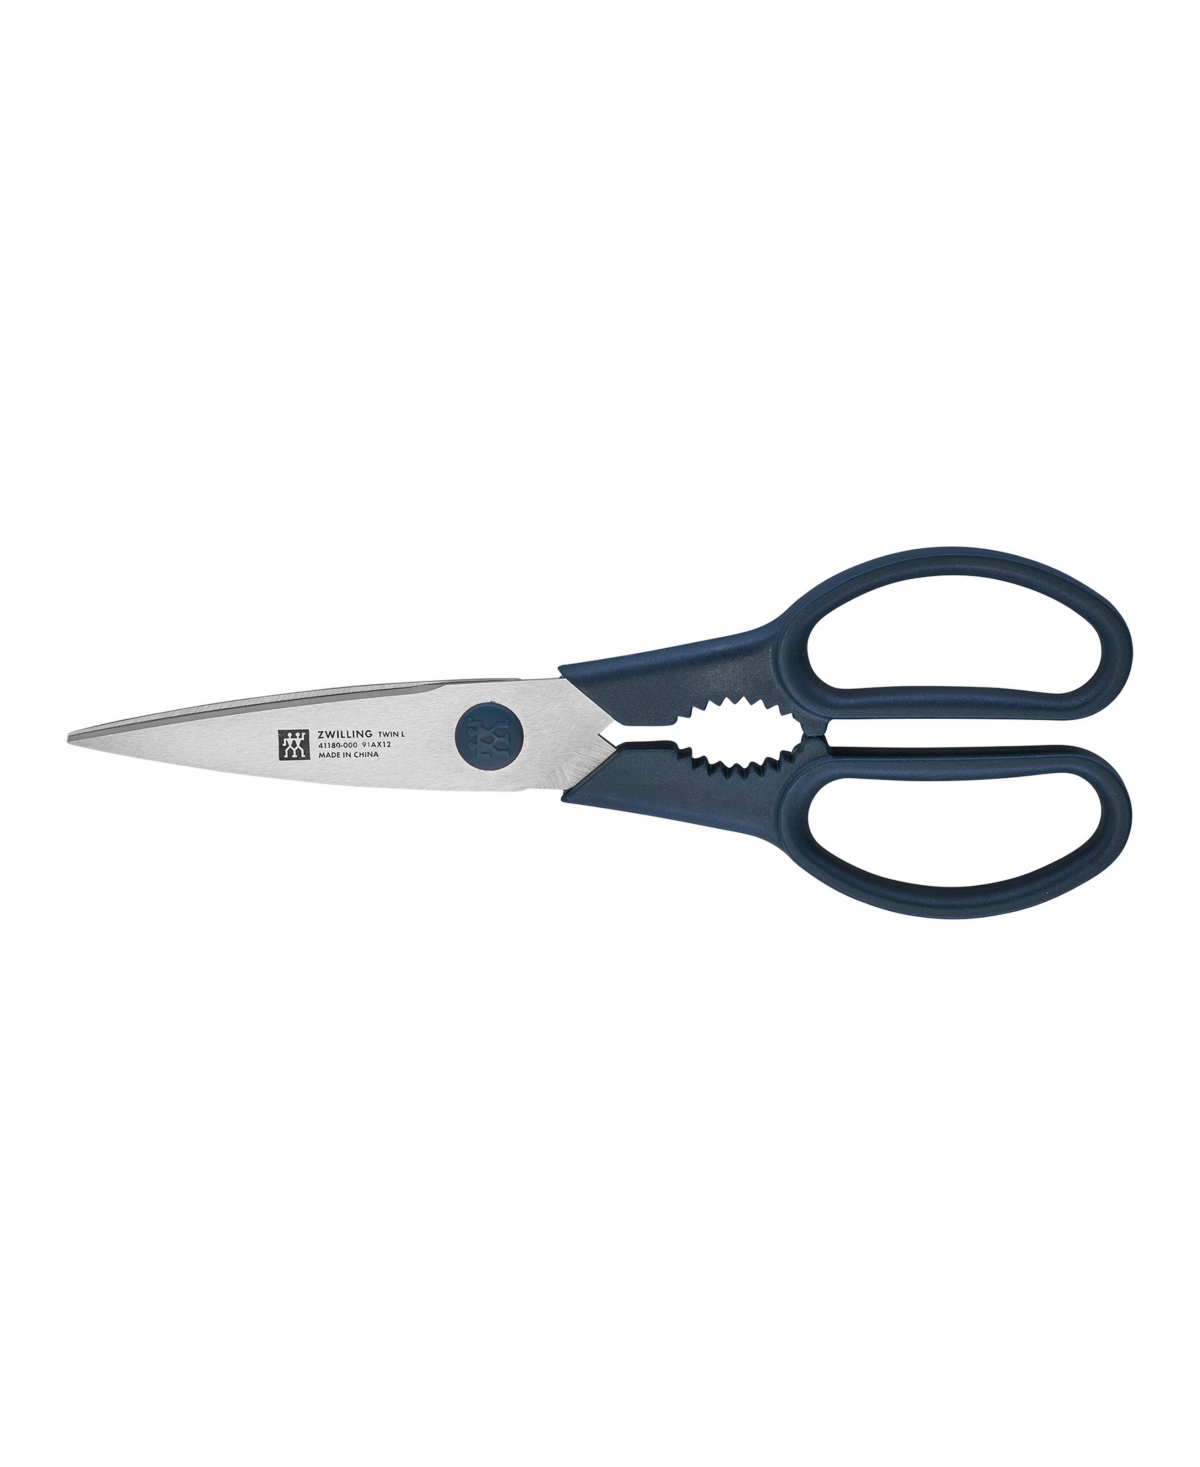 ZWILLING NOW SÂ KITCHEN SHEARS